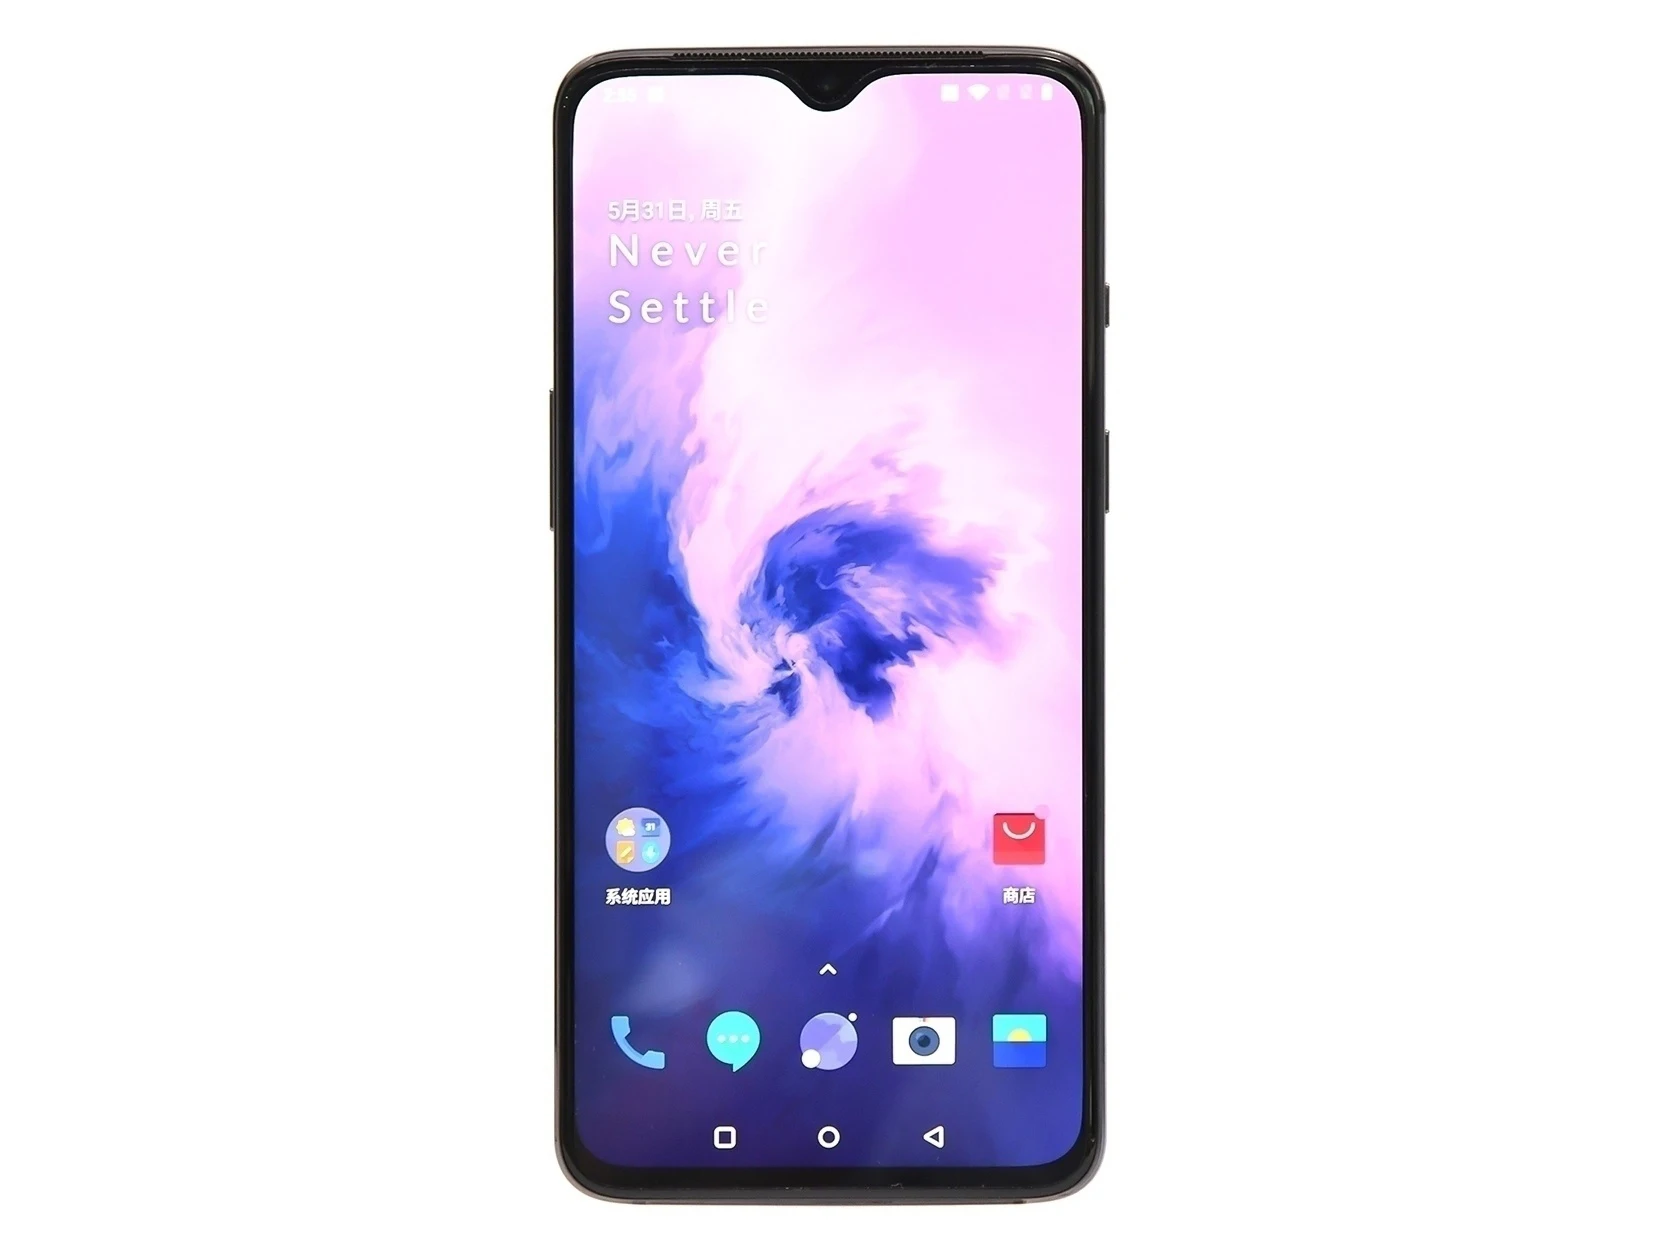 cheapest oneplus phone New Original Oneplus 7 Mobile Phone Global Rom 6.41 Inch AMOLED Display Octa Core Snapdragon 855 NFC 1080x2340 pixels Telephone best phone of oneplus